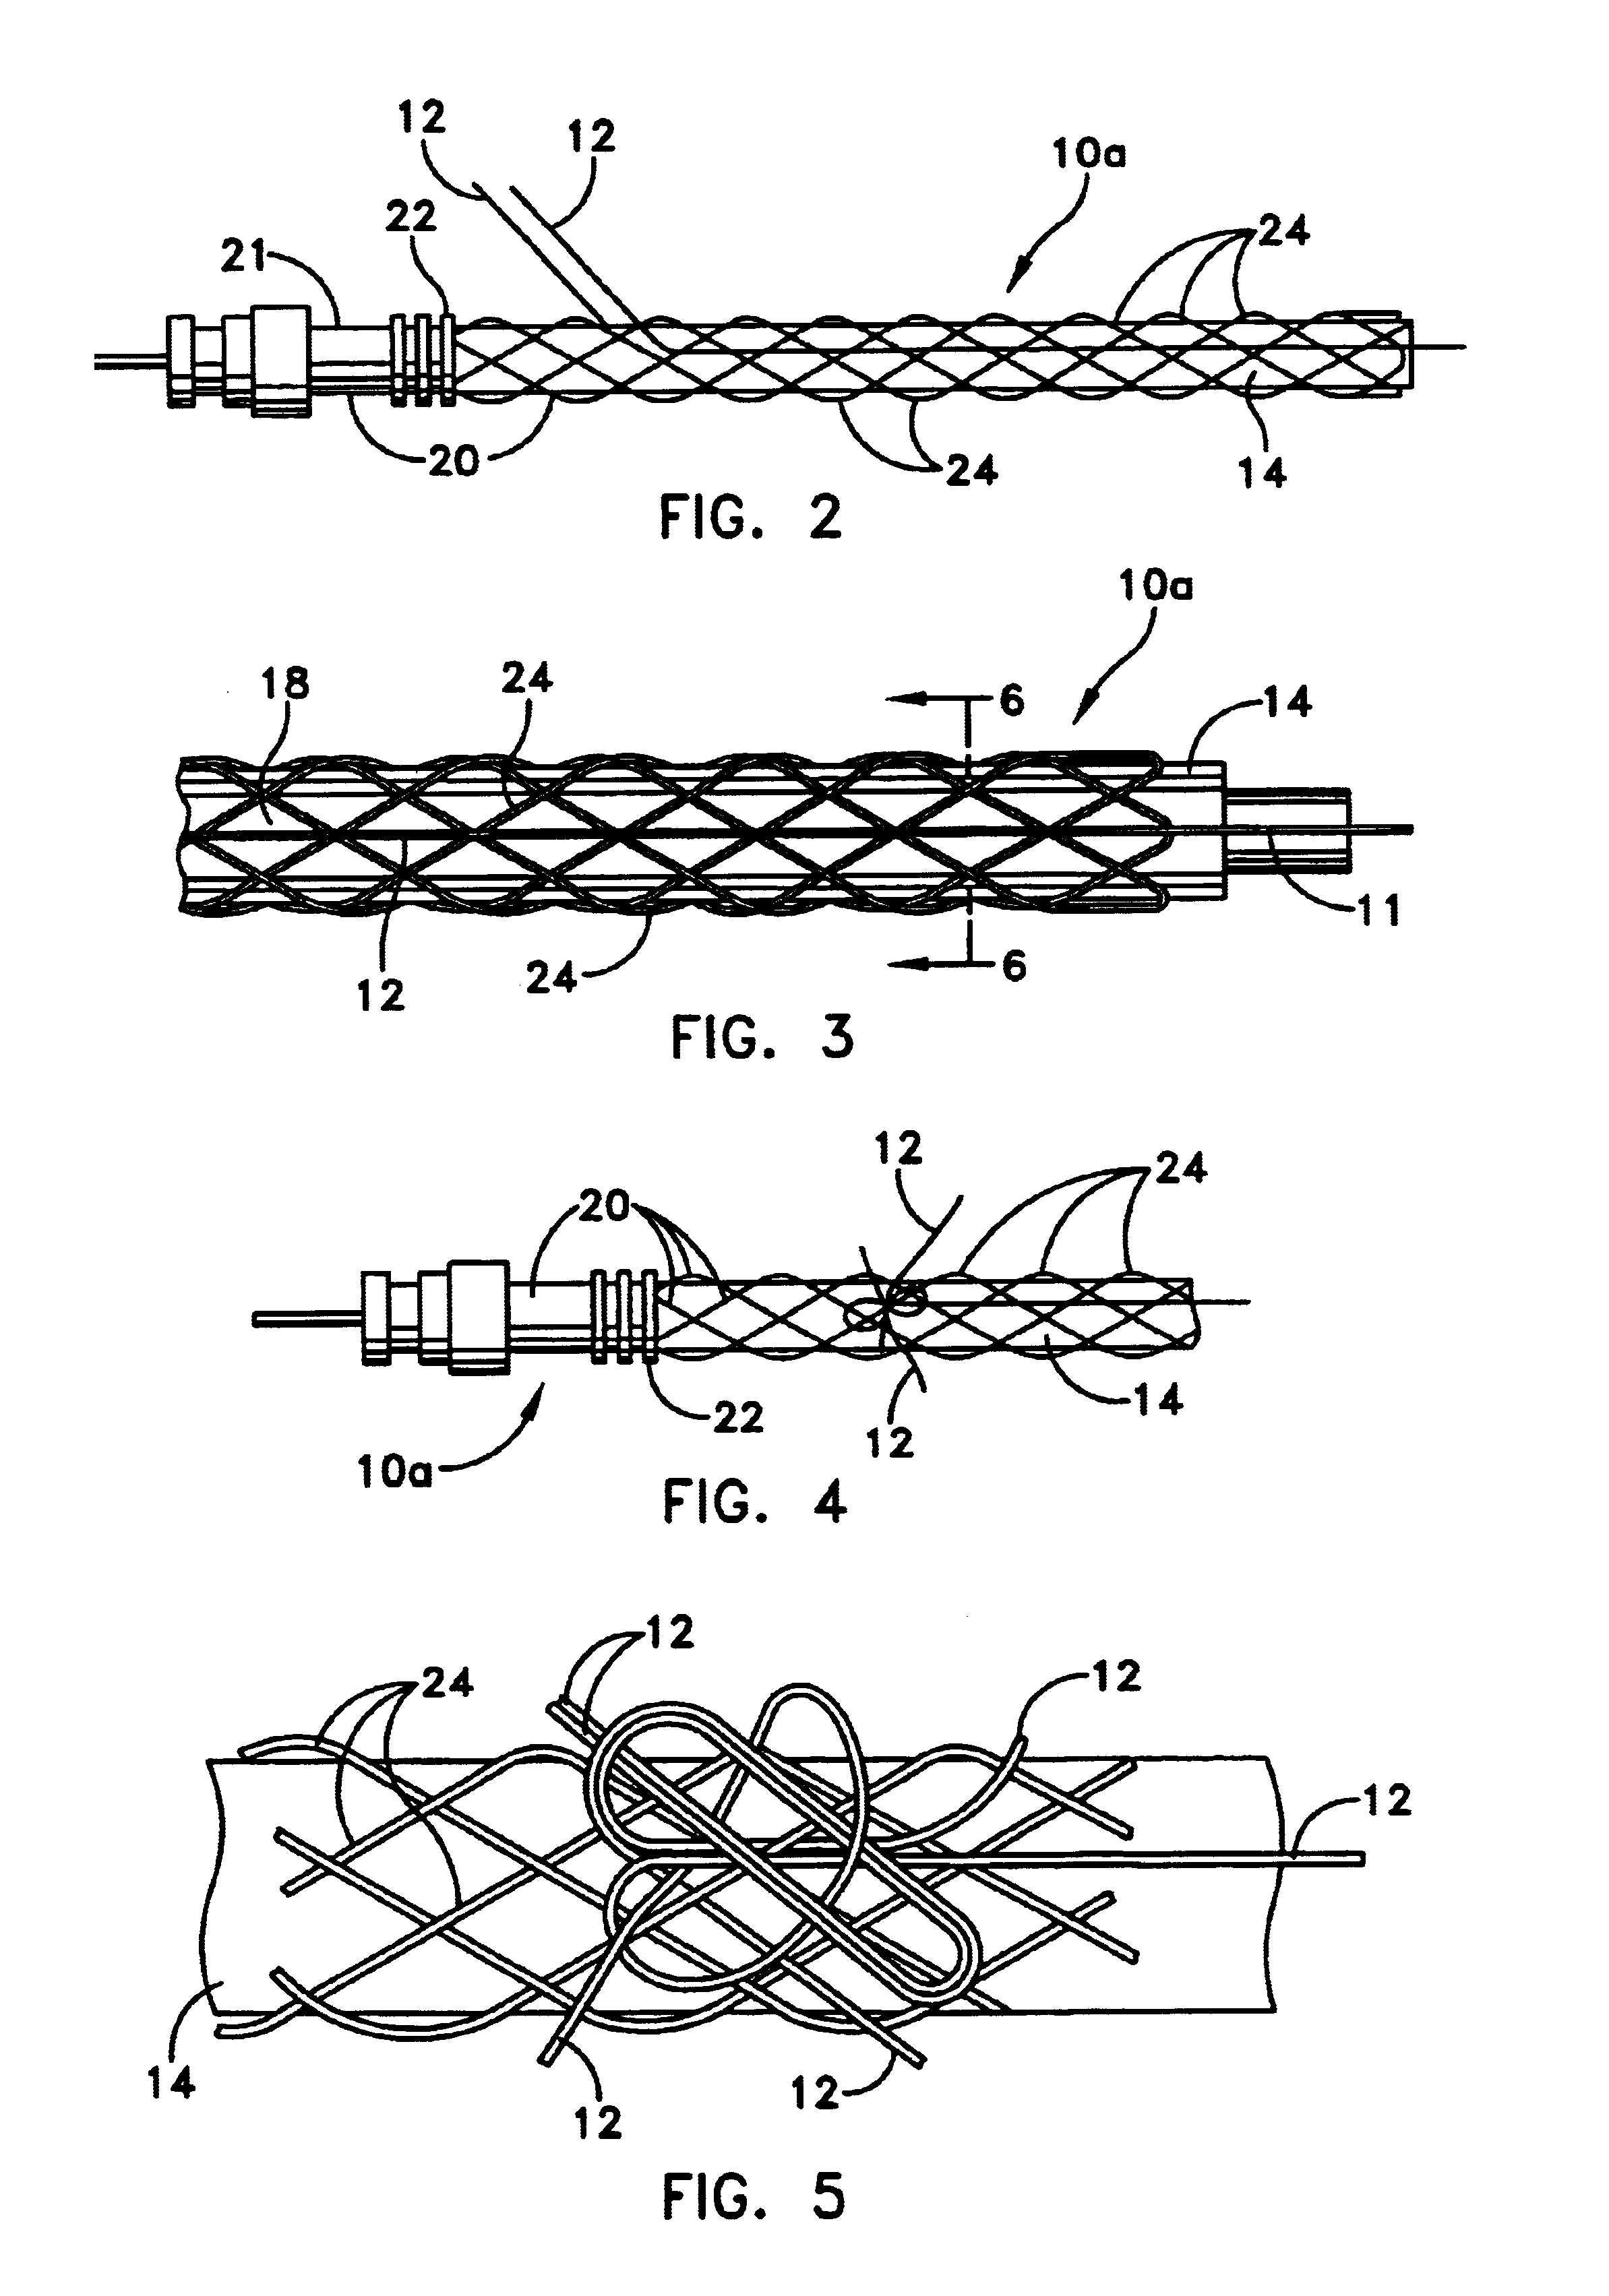 Strength strand construction for a longitudinal section of a cable